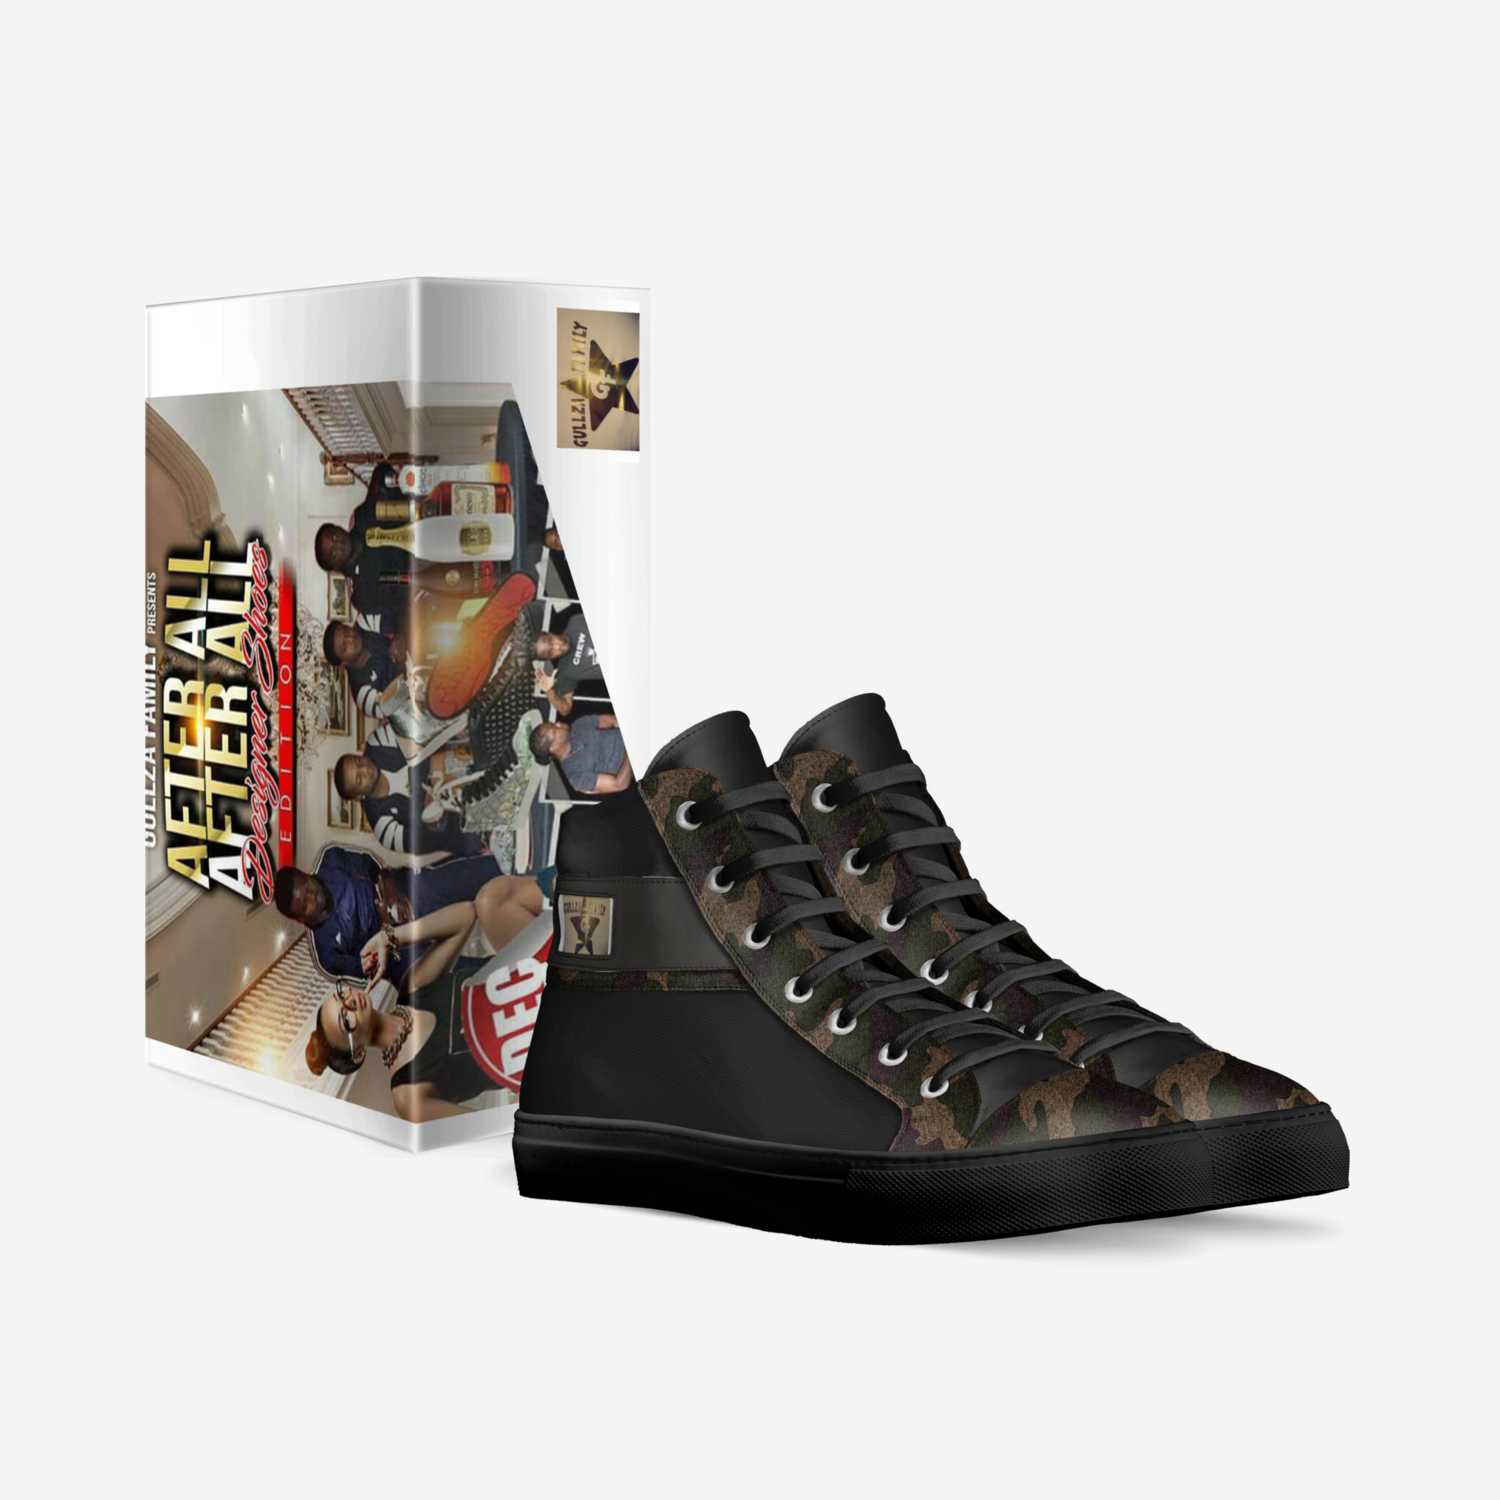 Gull Za Gen custom made in Italy shoes by Budz King | Box view